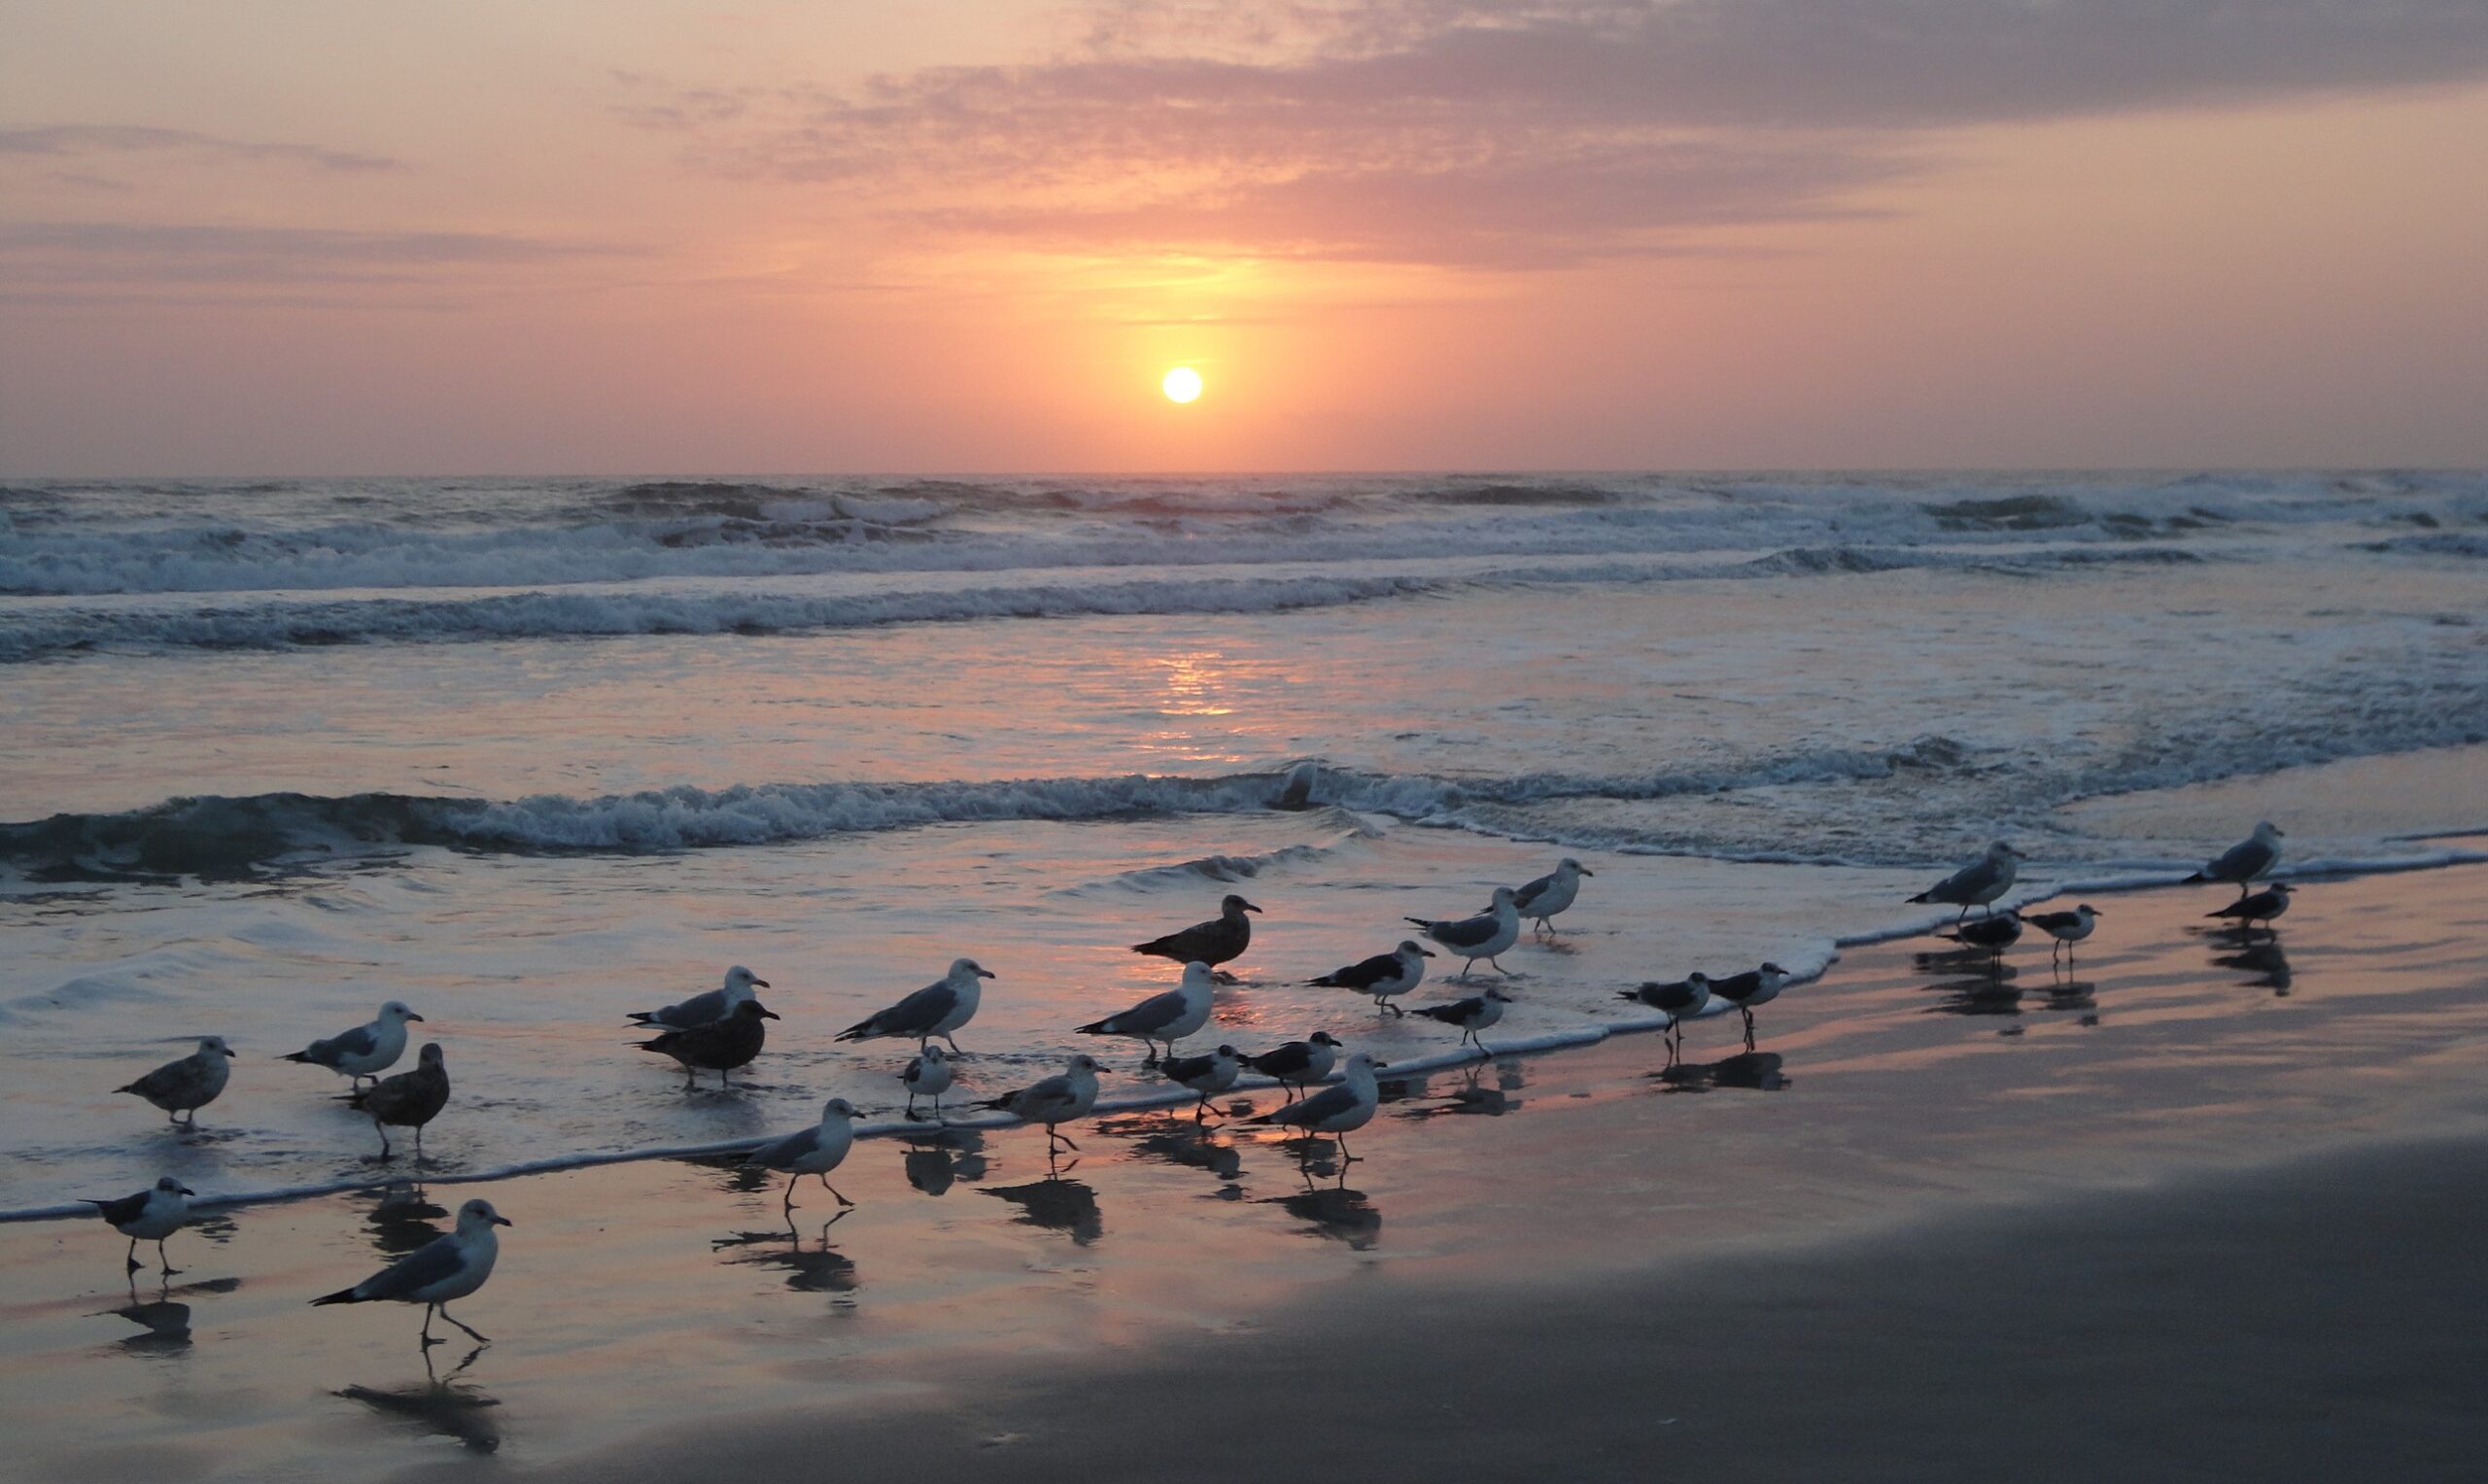 The beautiful beach in Ocean City, MD at sunrise with seagulls in the foreground